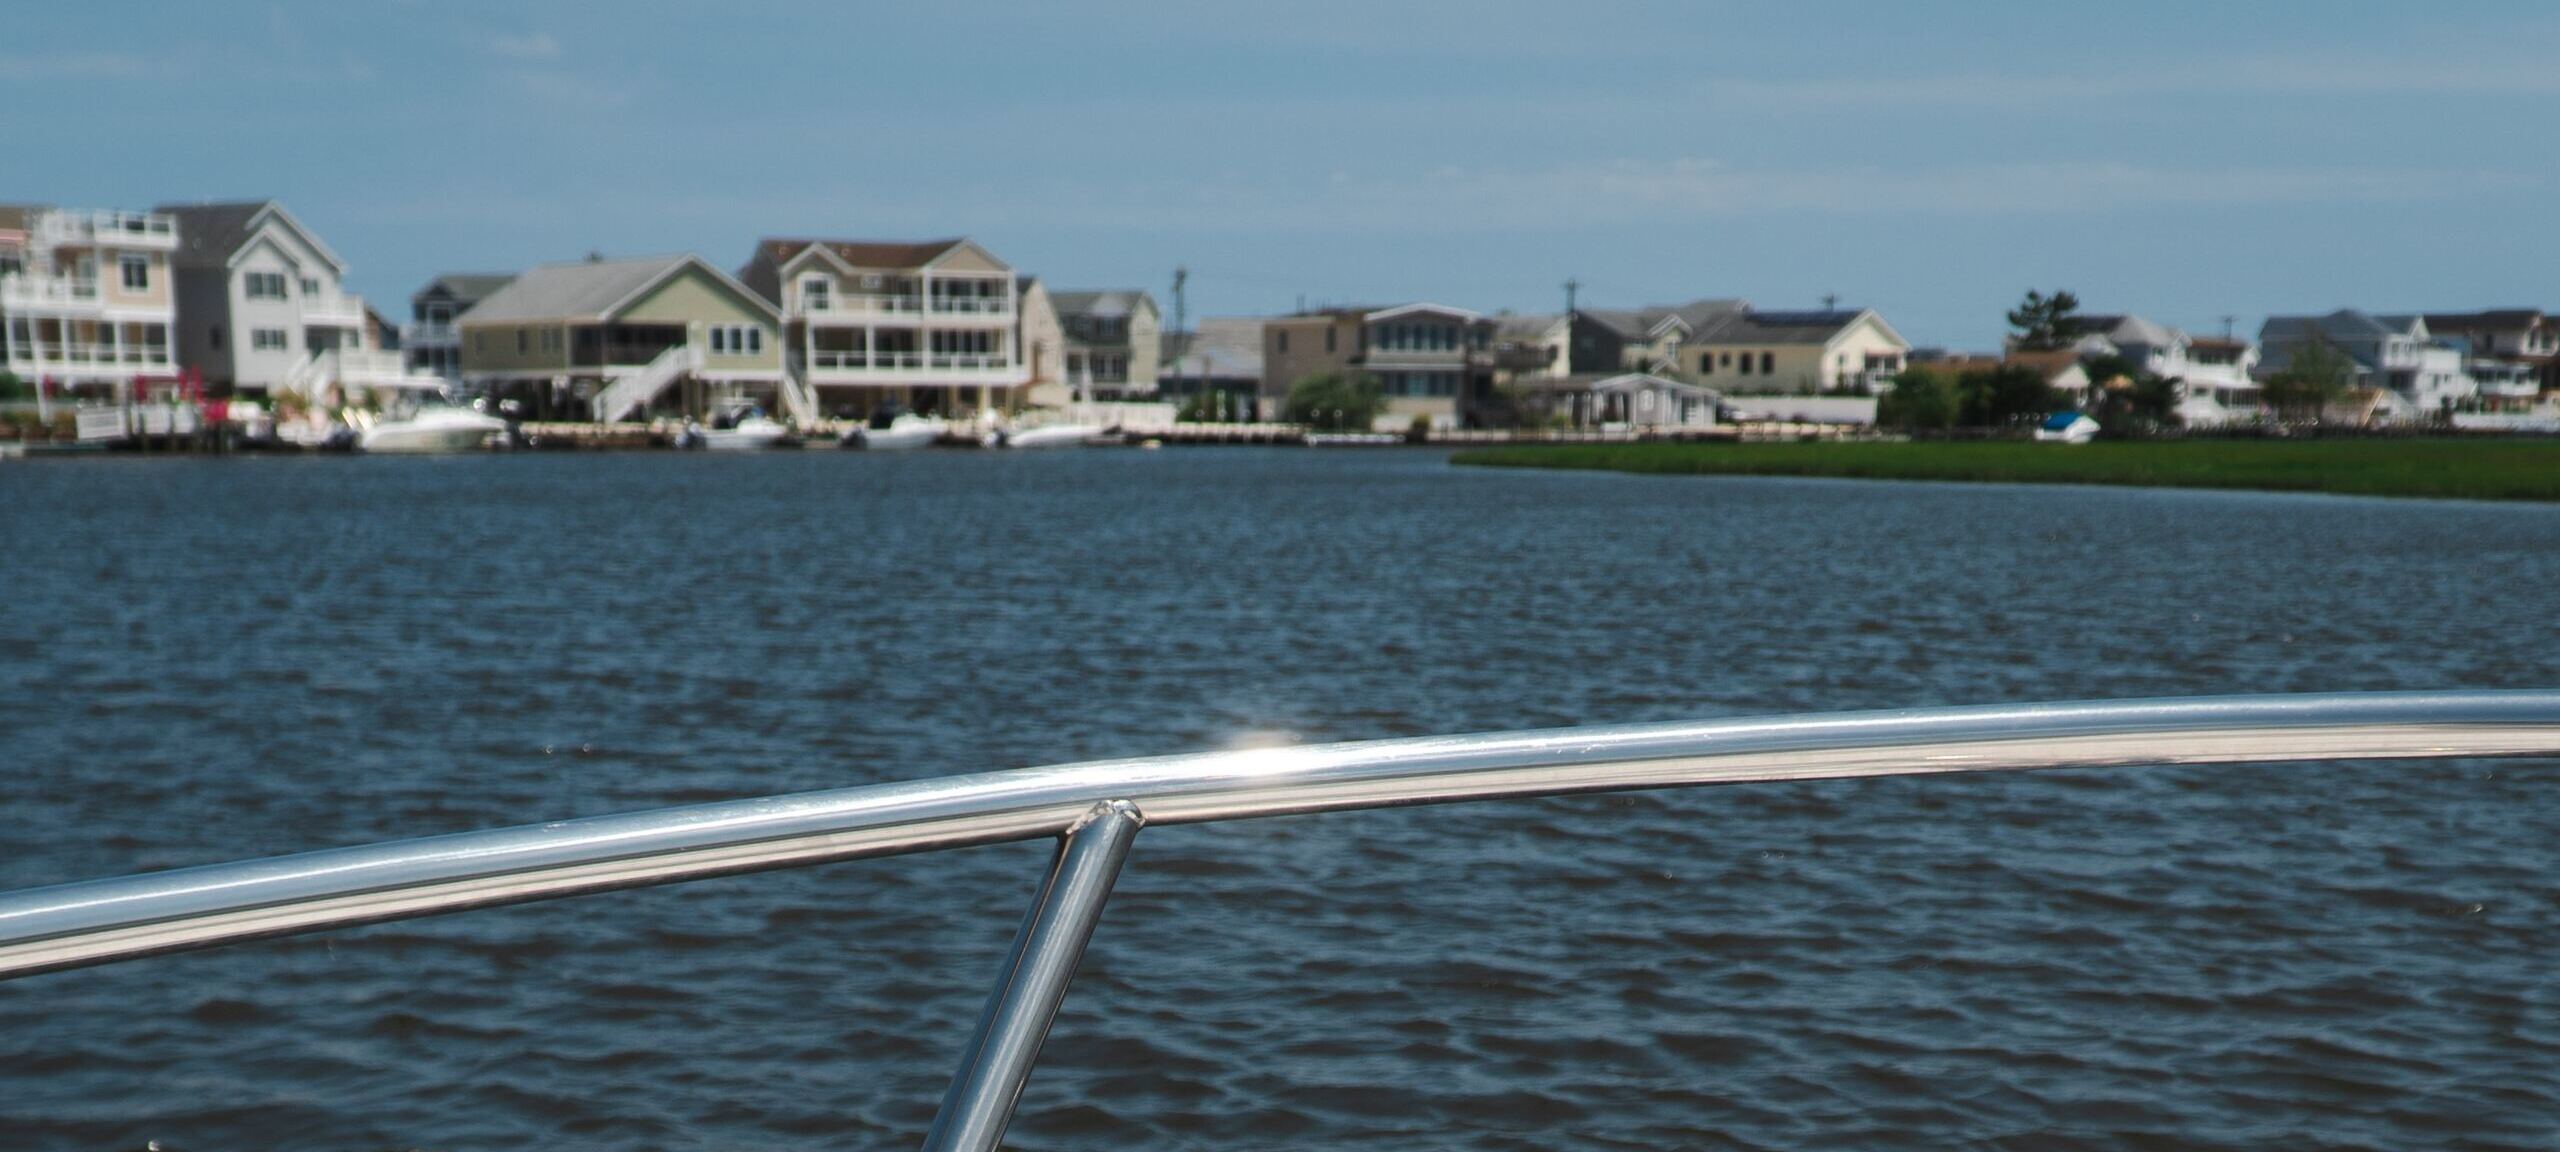 Bayfront homes in the Jersey Shore from a private yacht. Photo by Jayson Boesman on Unsplash